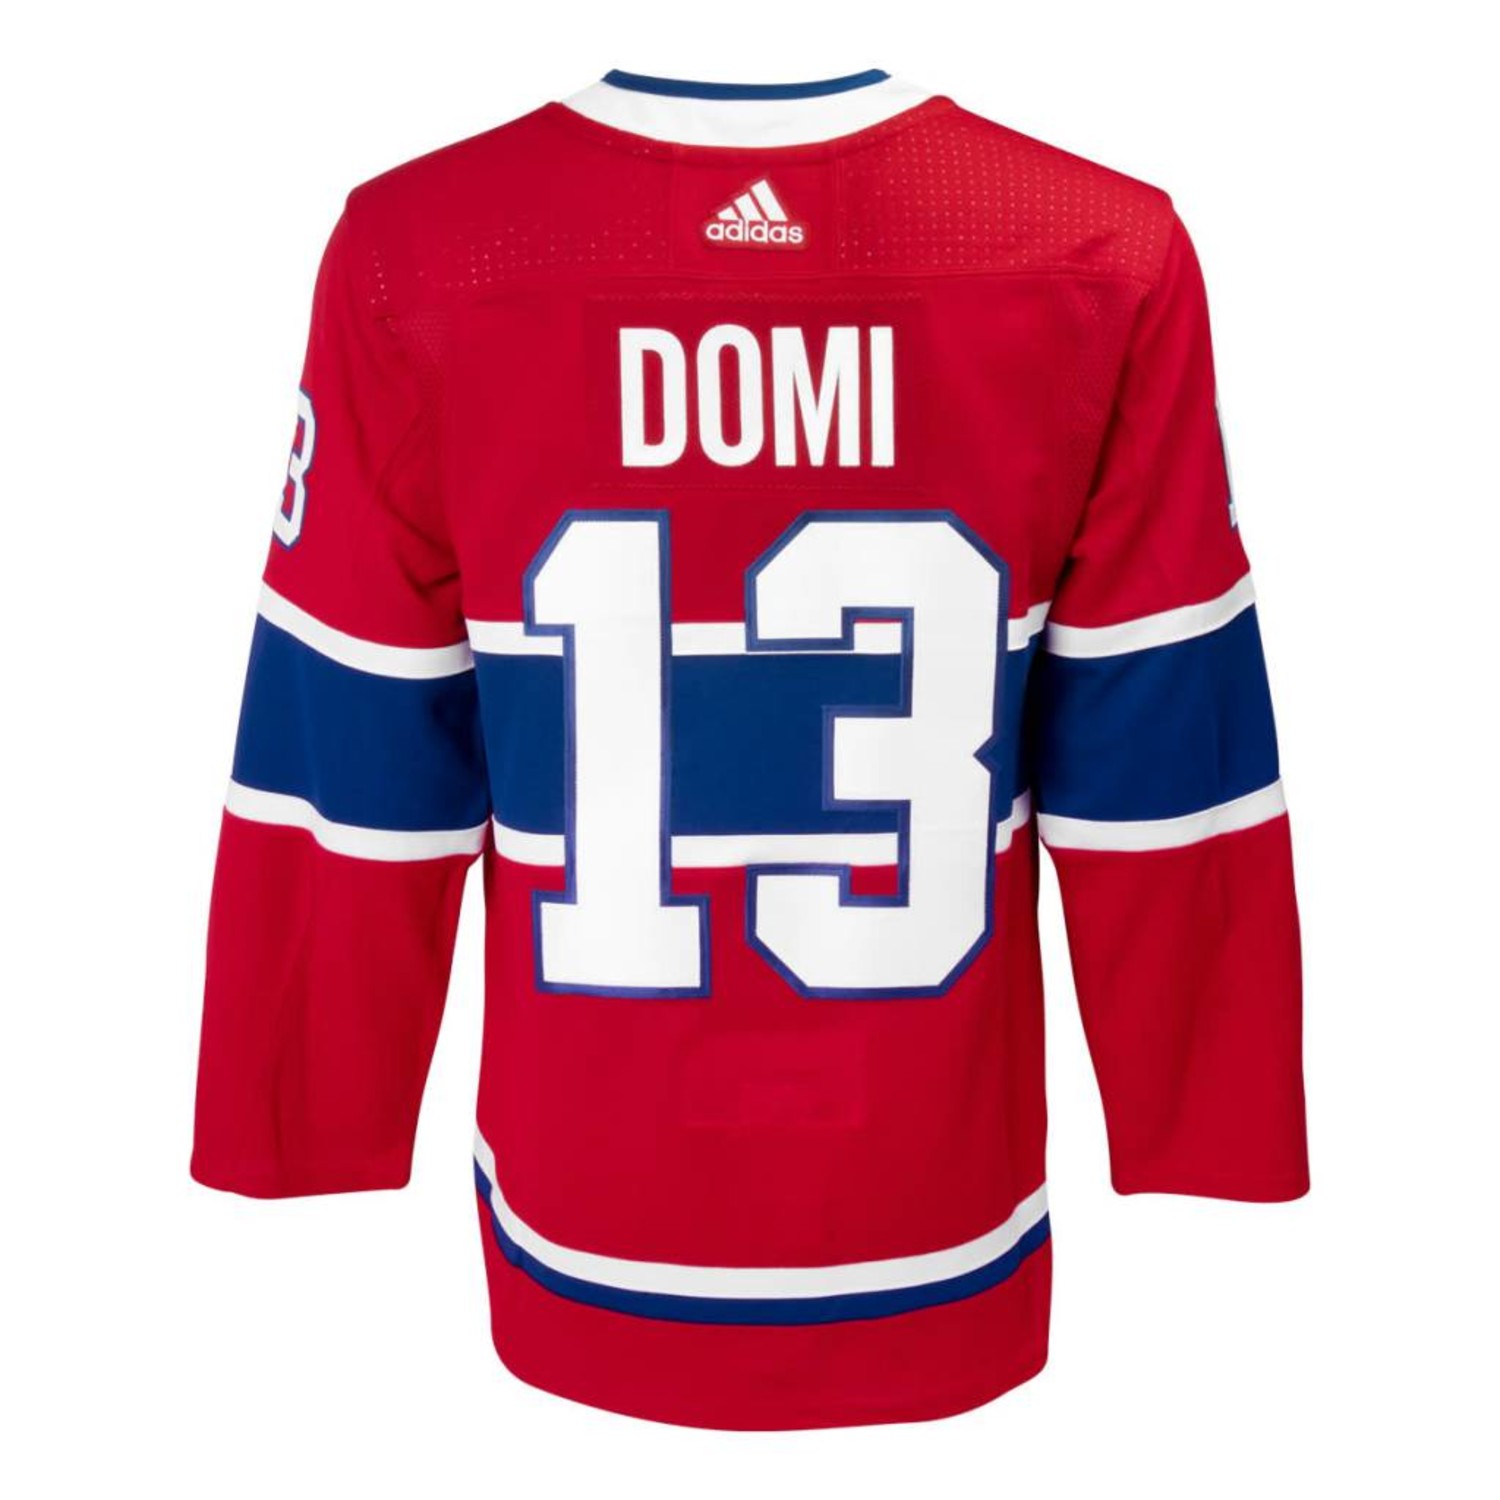 max domi youth jersey